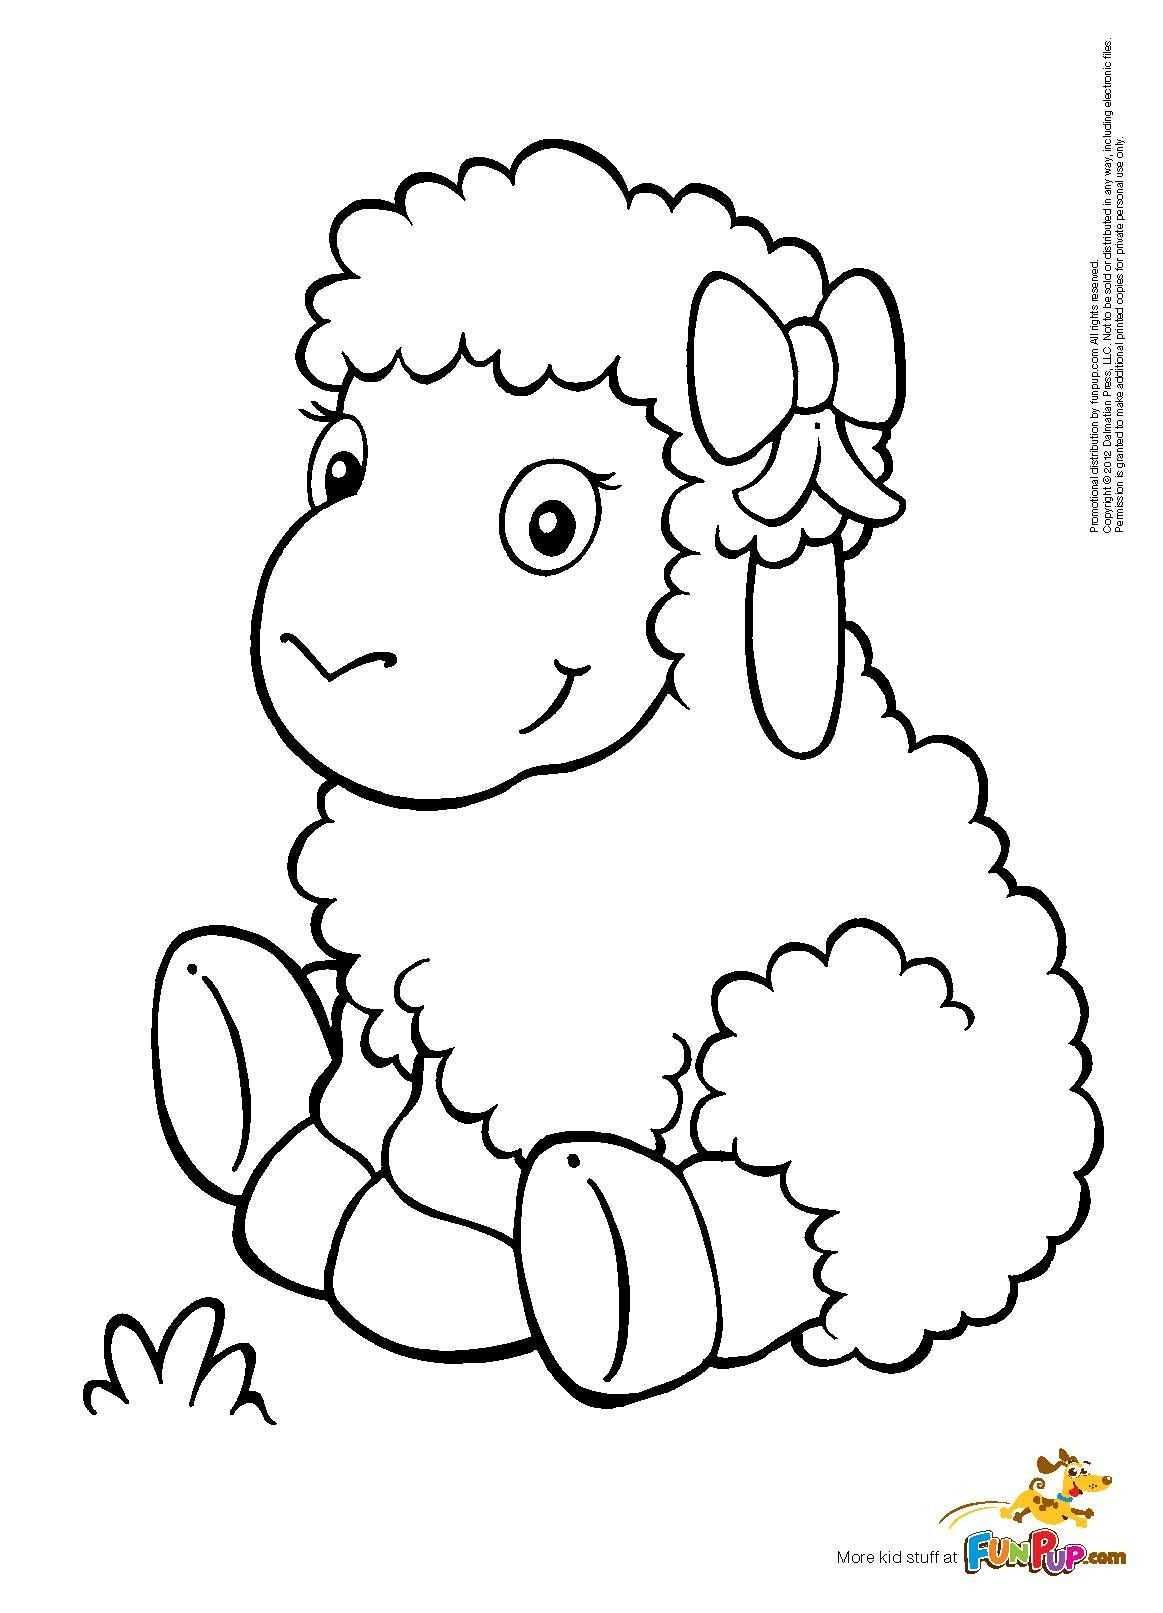 Happy Sheep Coloring Page Coloring Pictures For Kids Animal Coloring Pages Coloring P